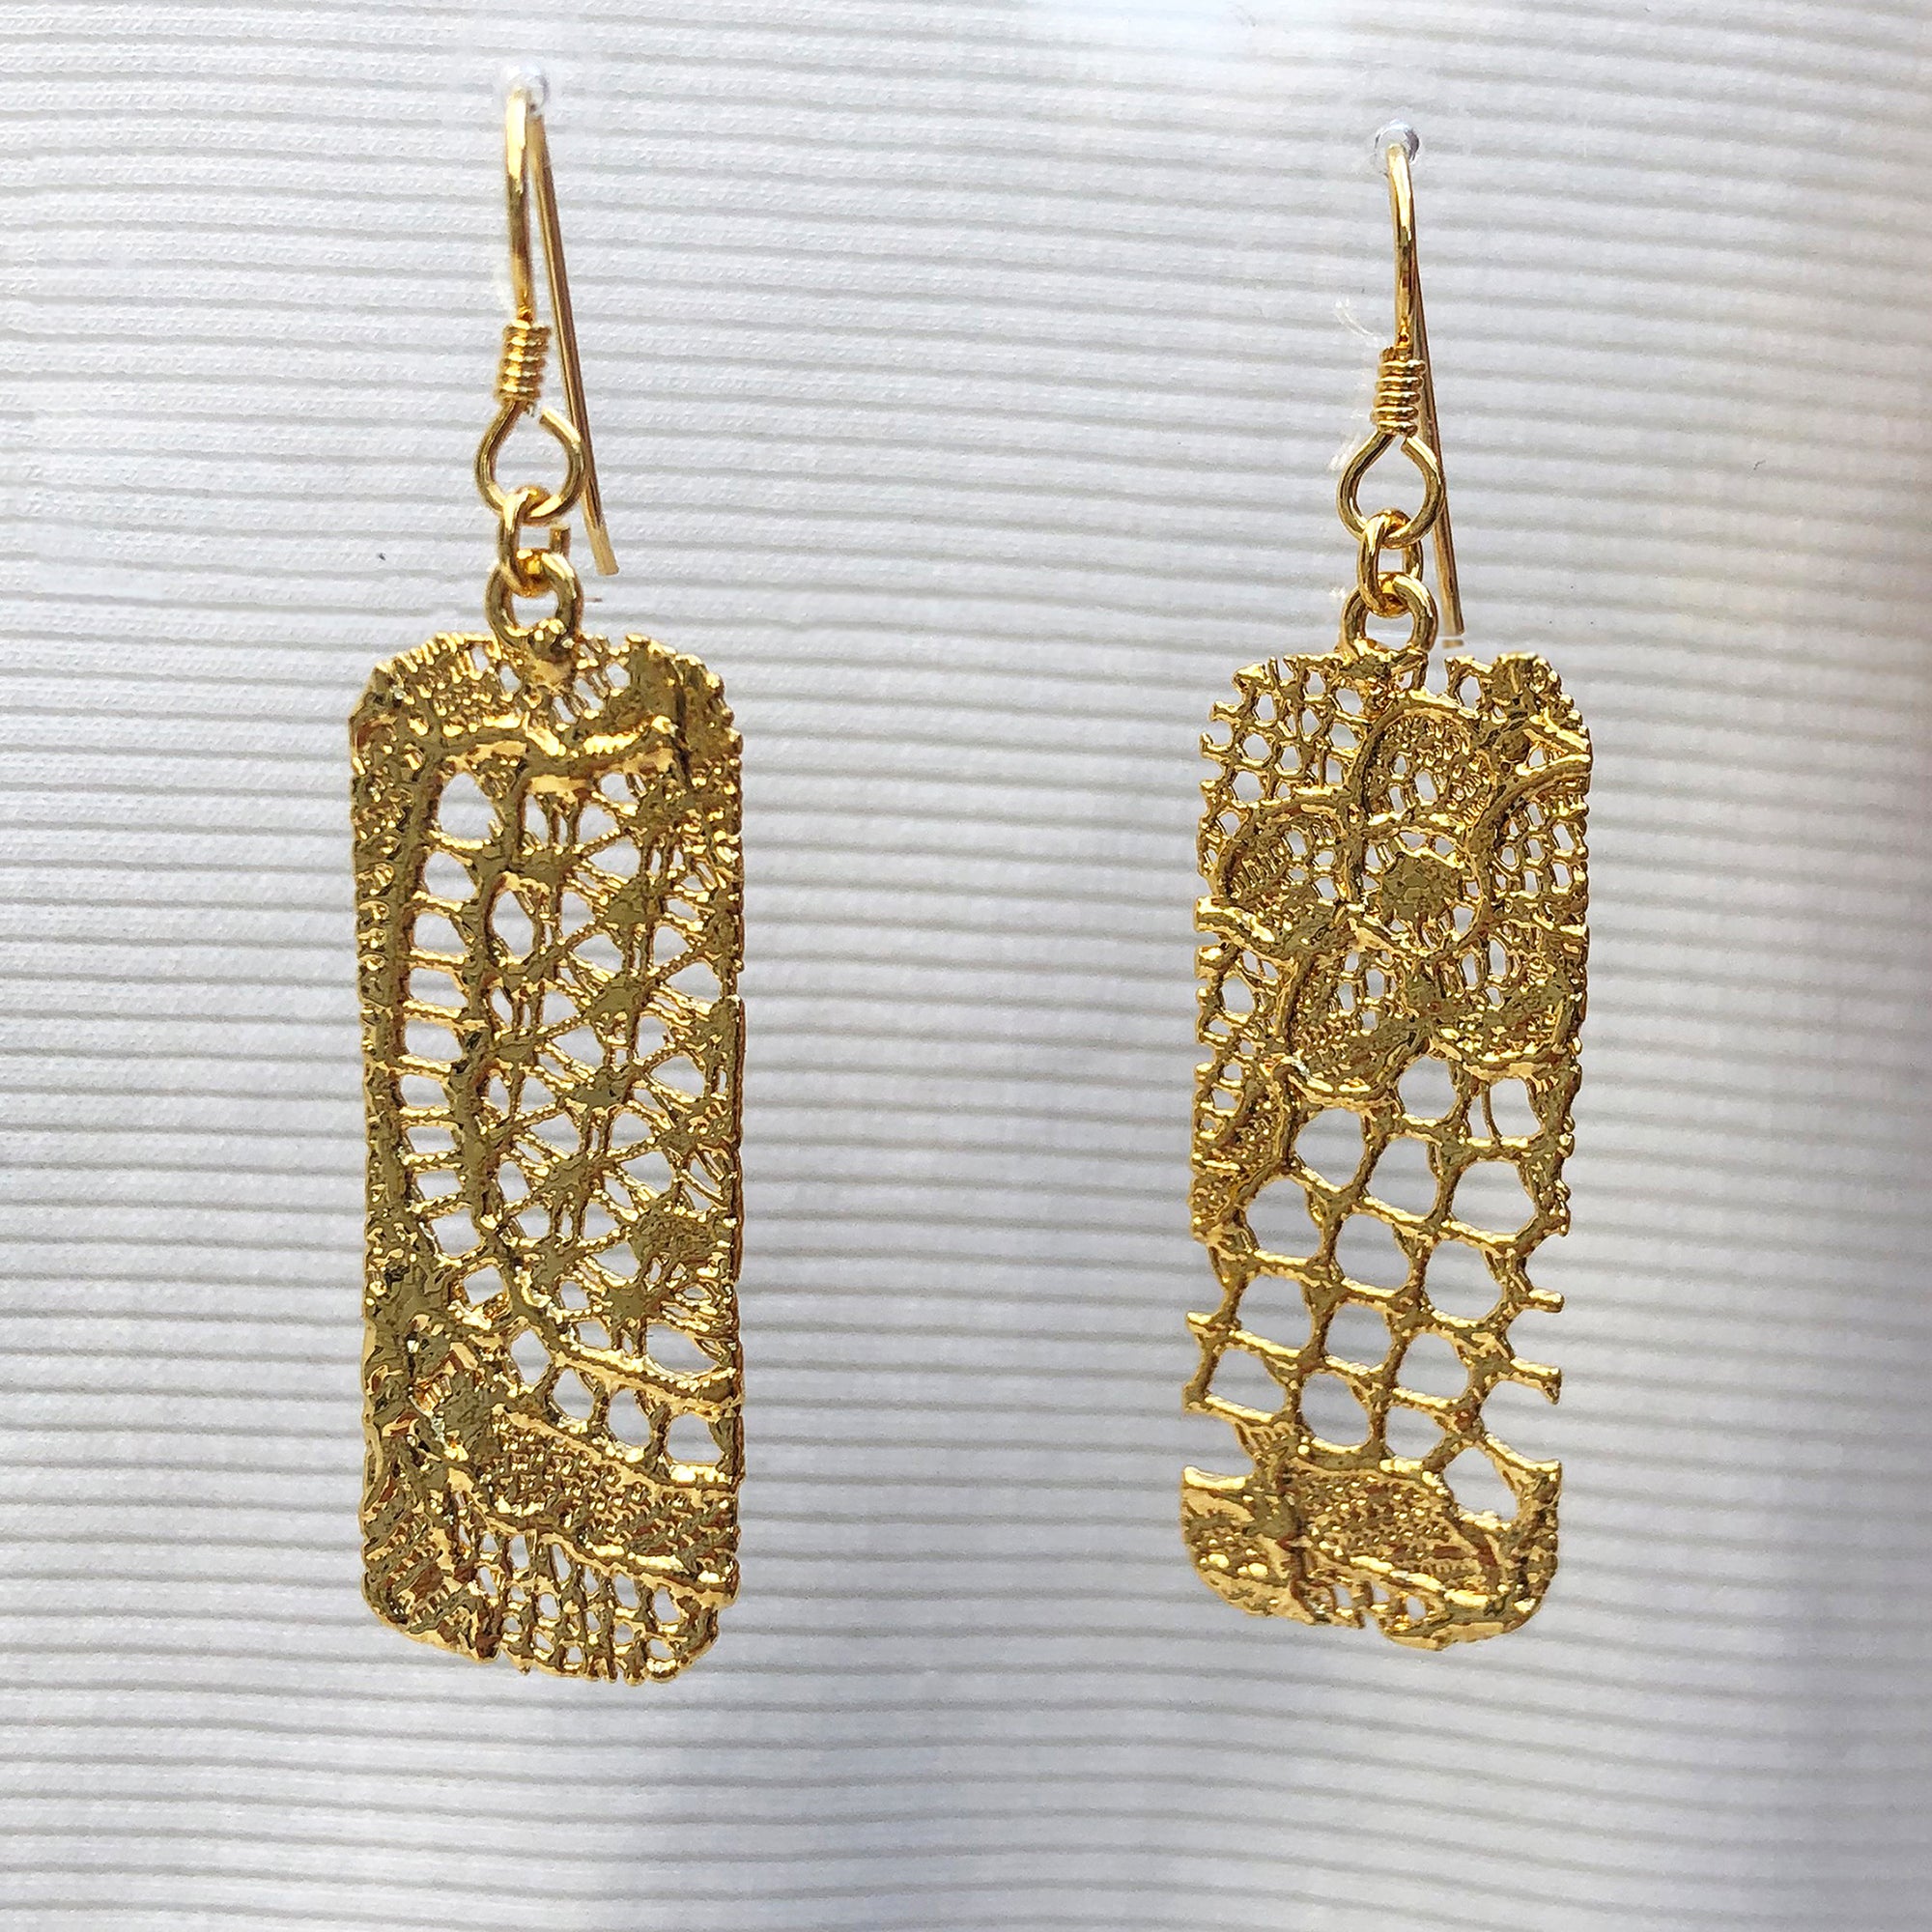 Brilliant Rectangular 24k gold Lace Earrings with French Hooks. 